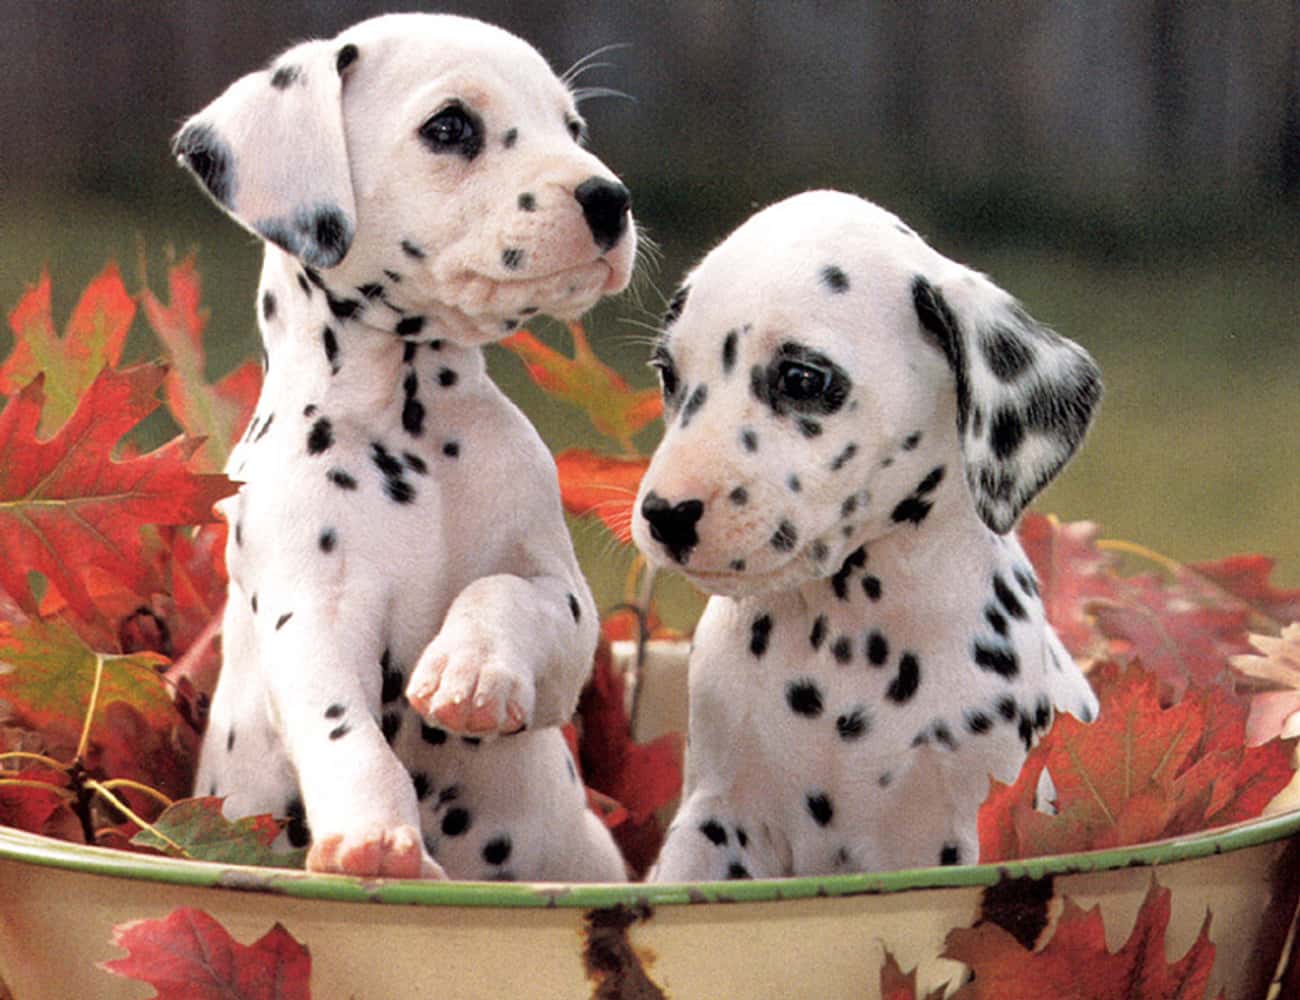 Pups in a Bucket of Leaves